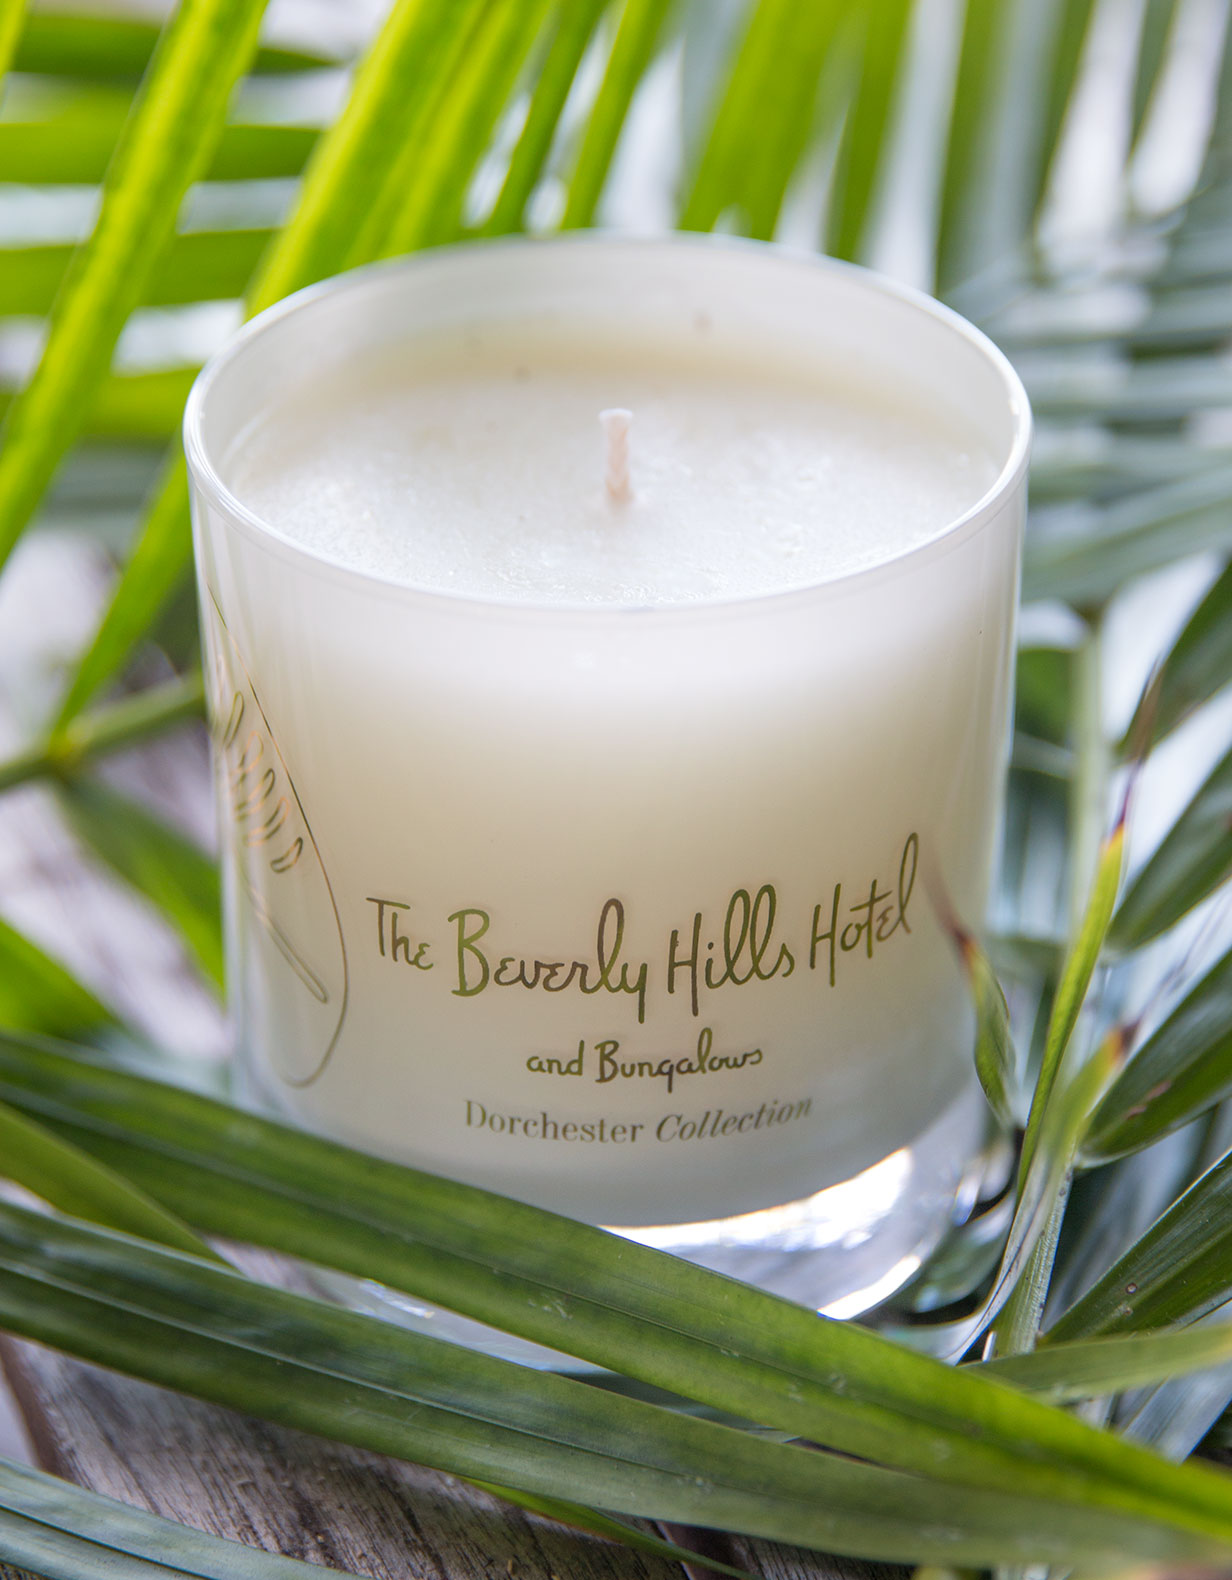 Beverly Hills Hotel Candle